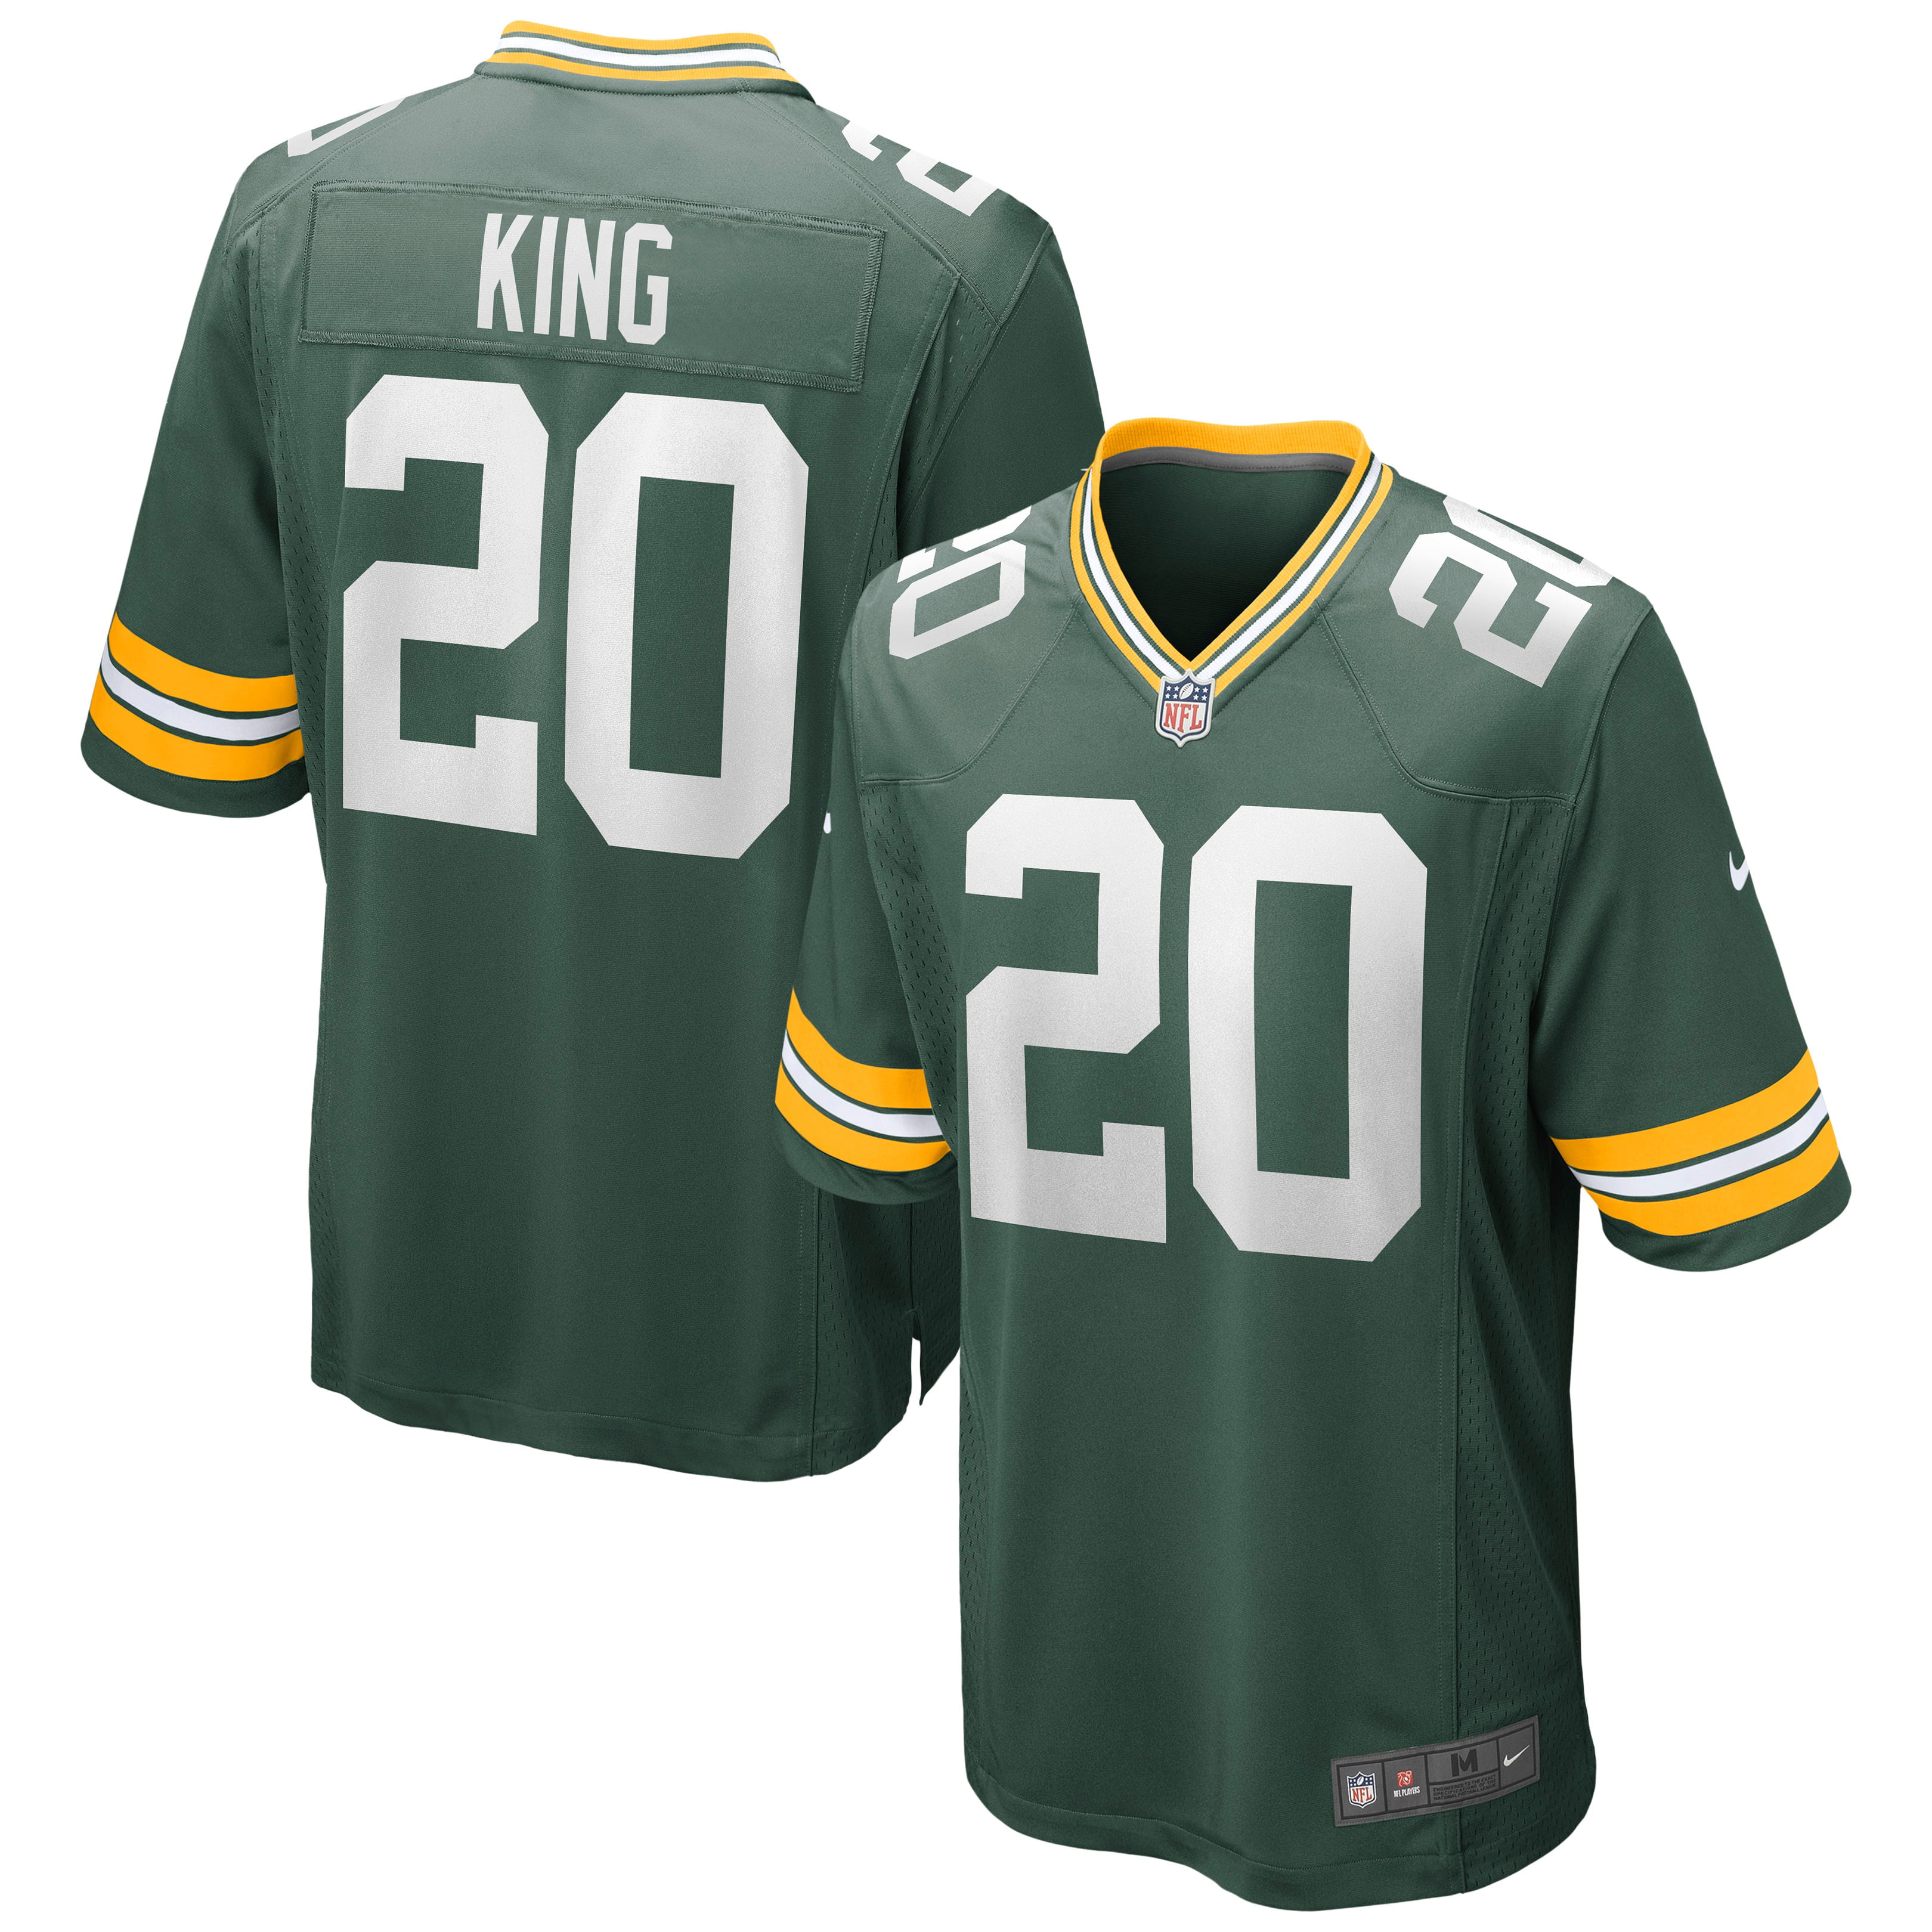 kevin king jersey